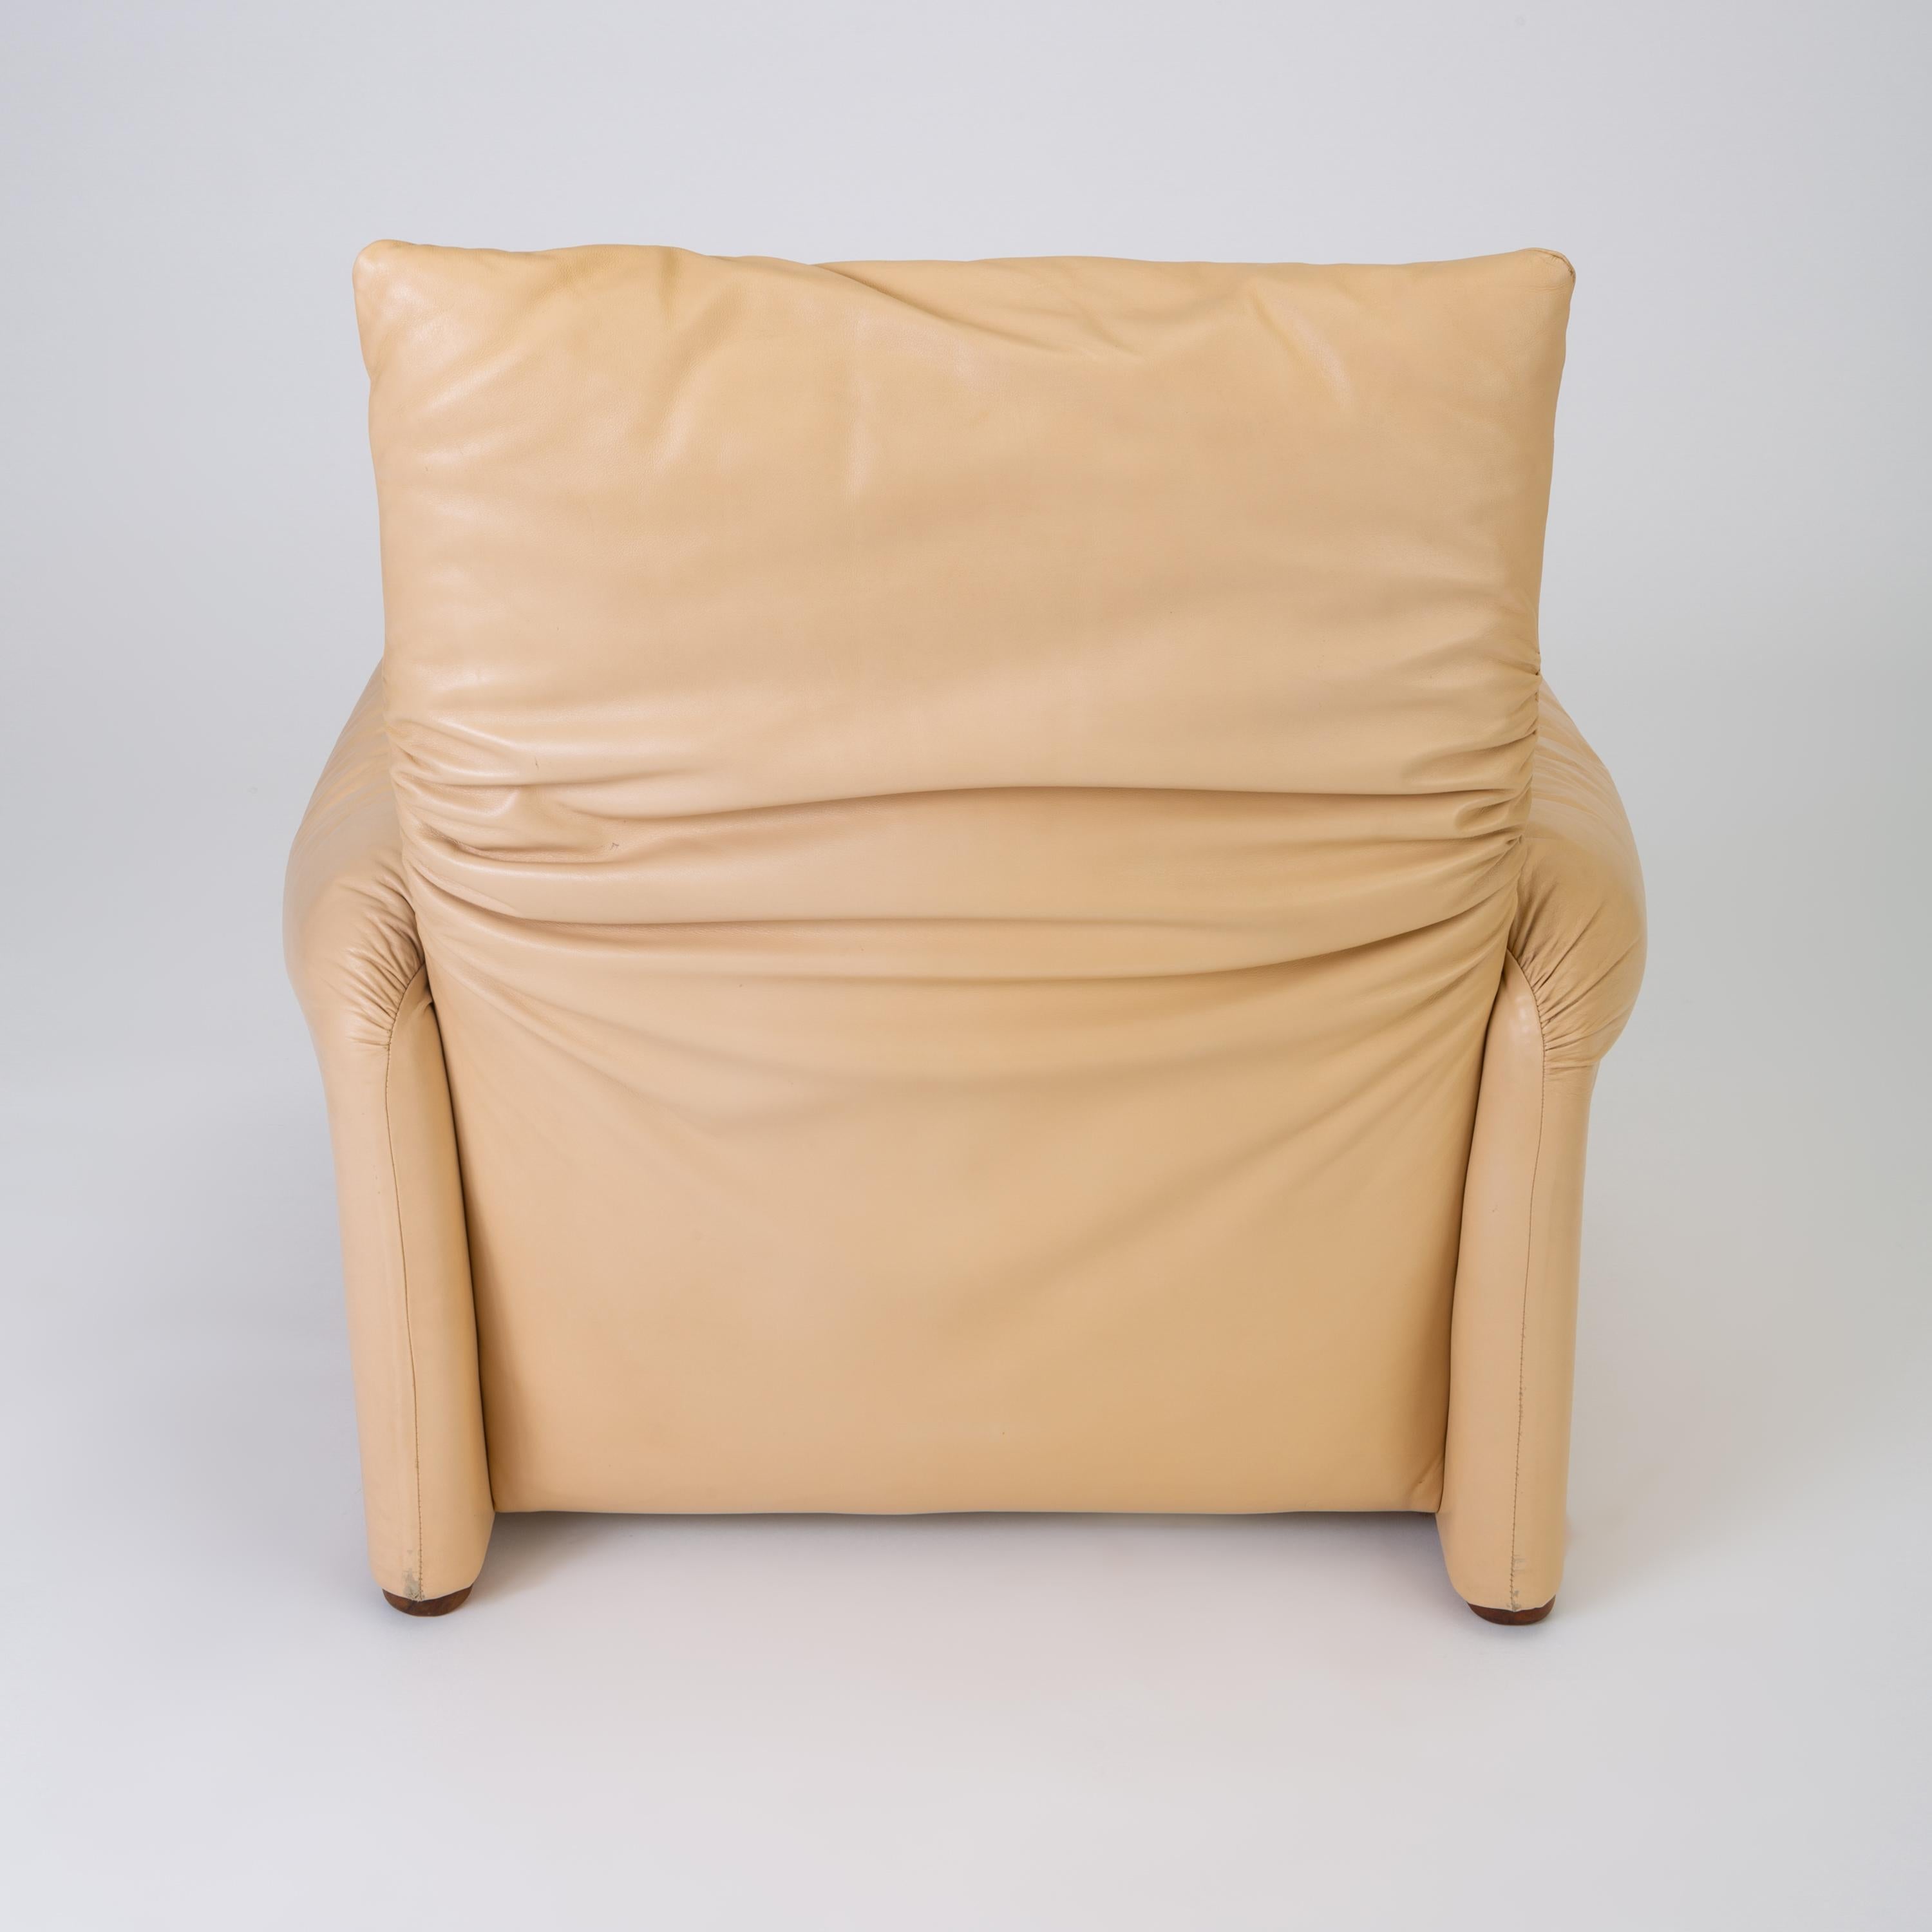 Leather “Maralunga” Chair by Vico Magistretti for Cassina 10